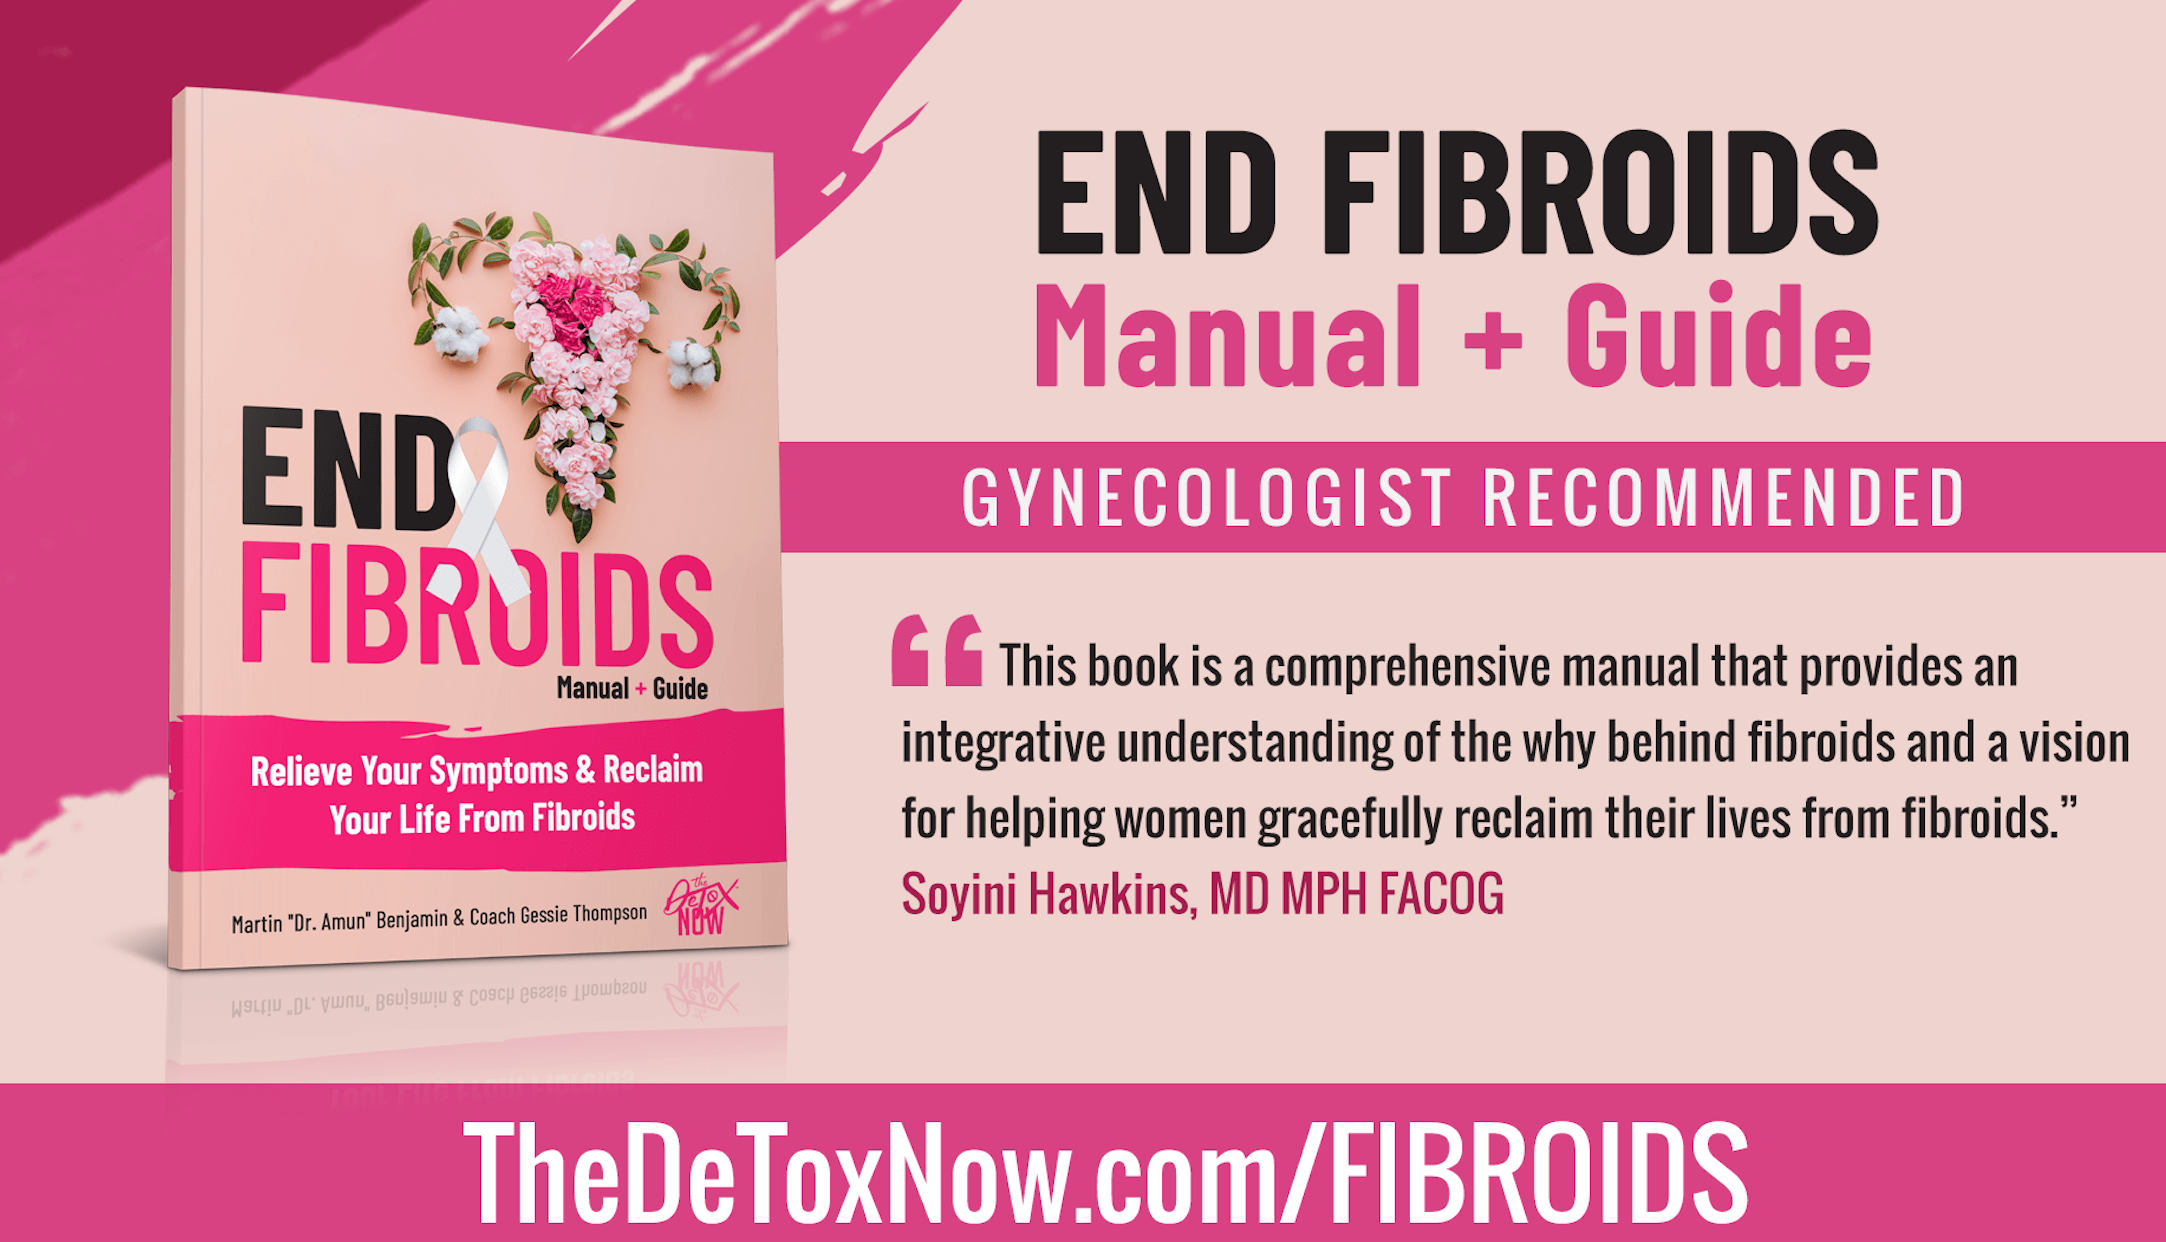 FINALLY! OBGYN approved fibroids treatment! - The Detox Now